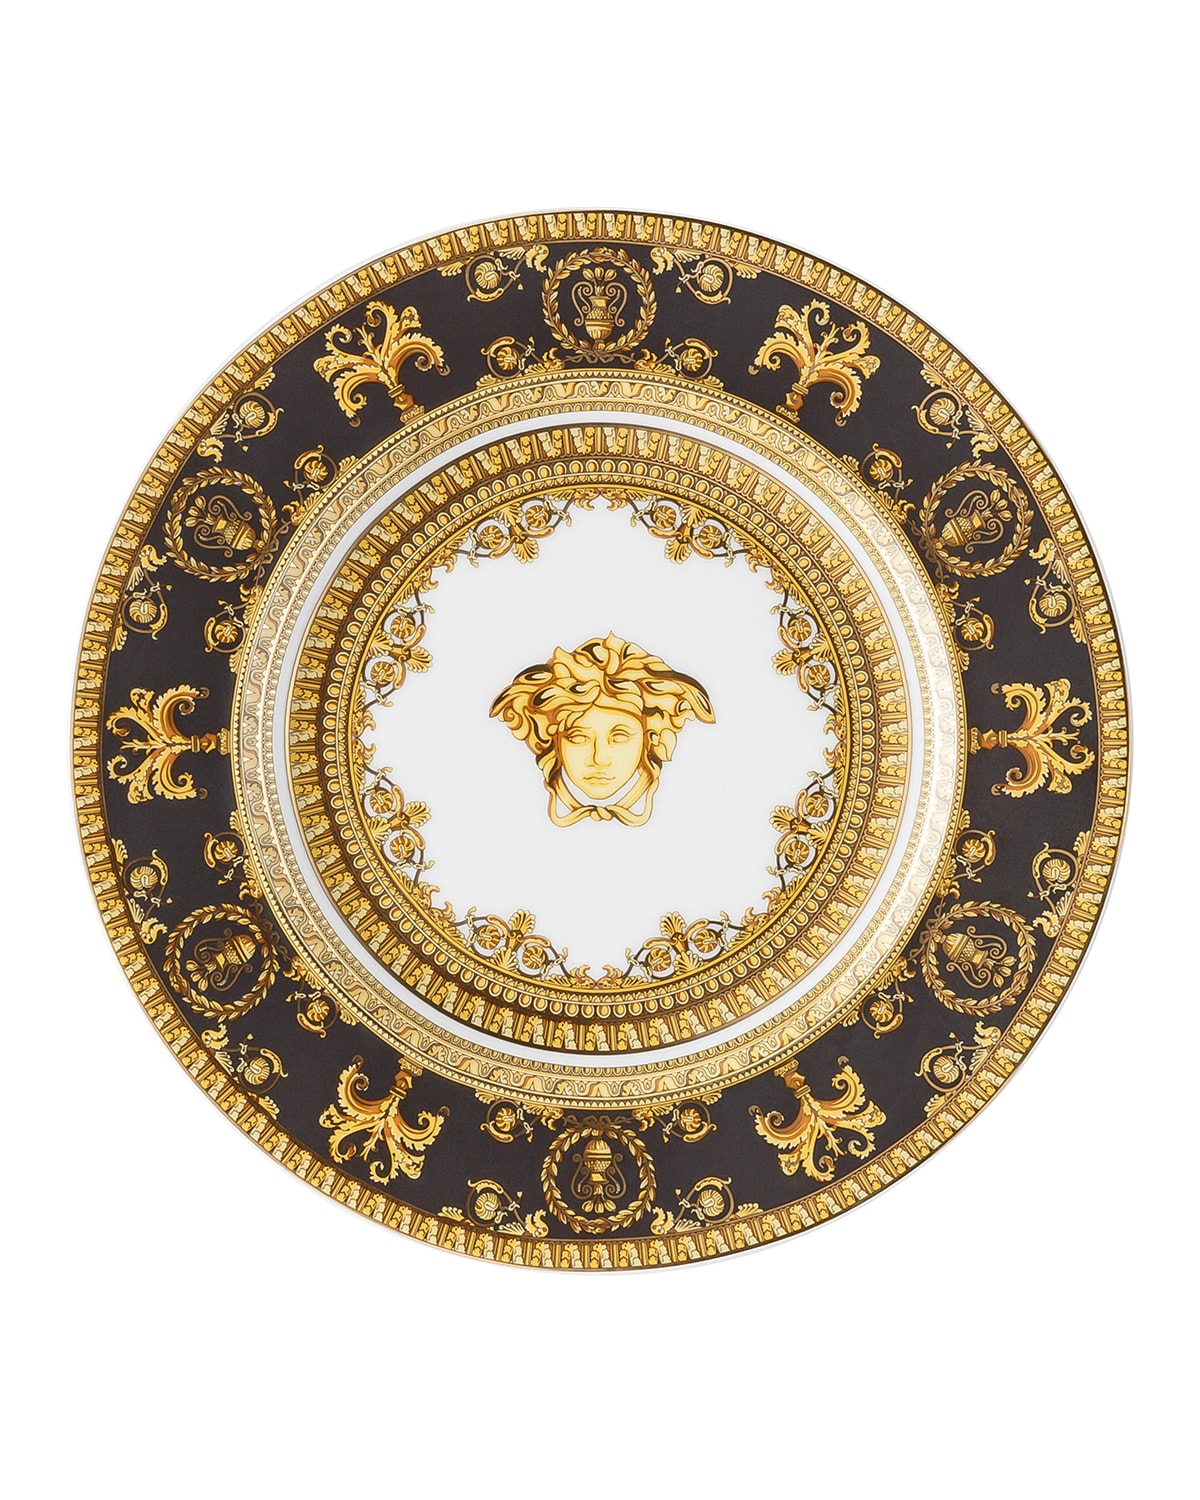 VERSACE I LOVE BAROQUE BREAD AND BUTTER PLATE